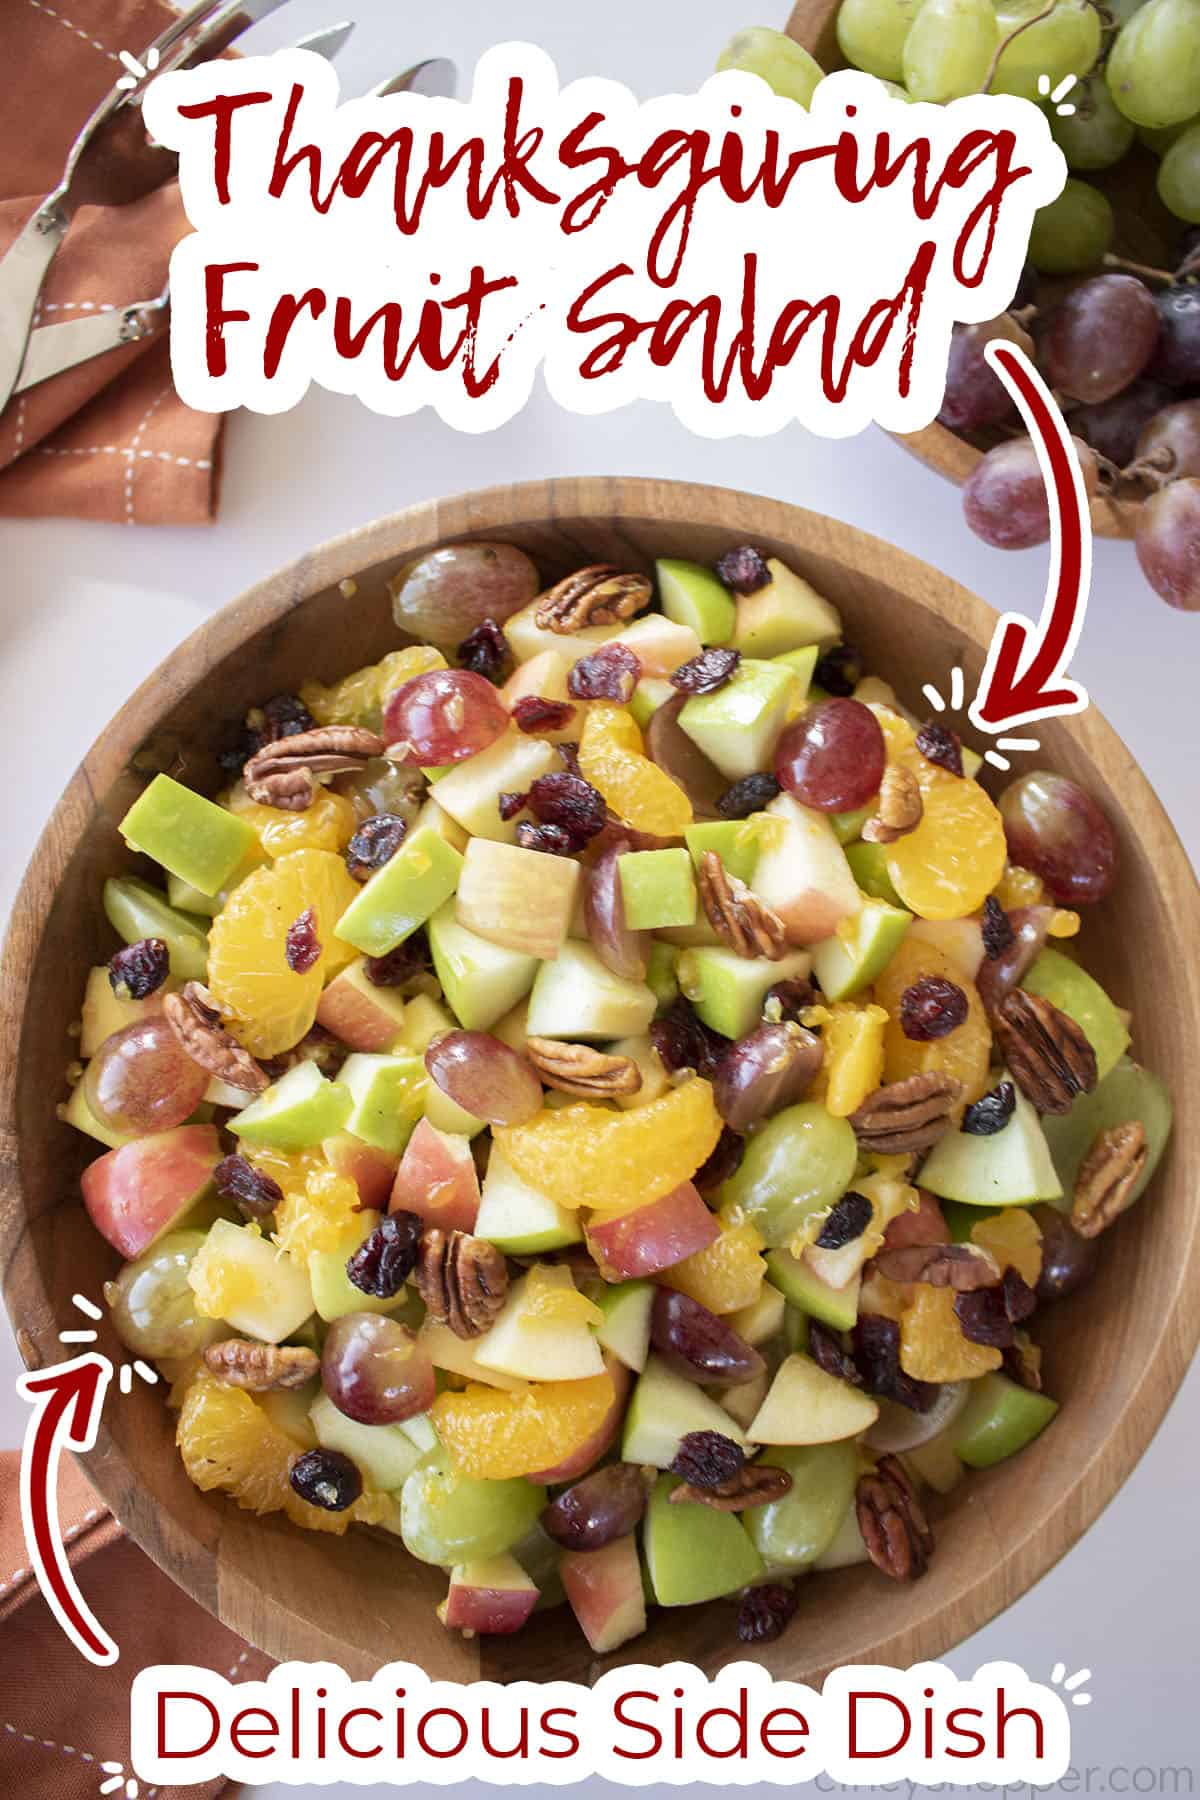 Text on image Thanksgiving Fruit Salad Delicious Side Dish.